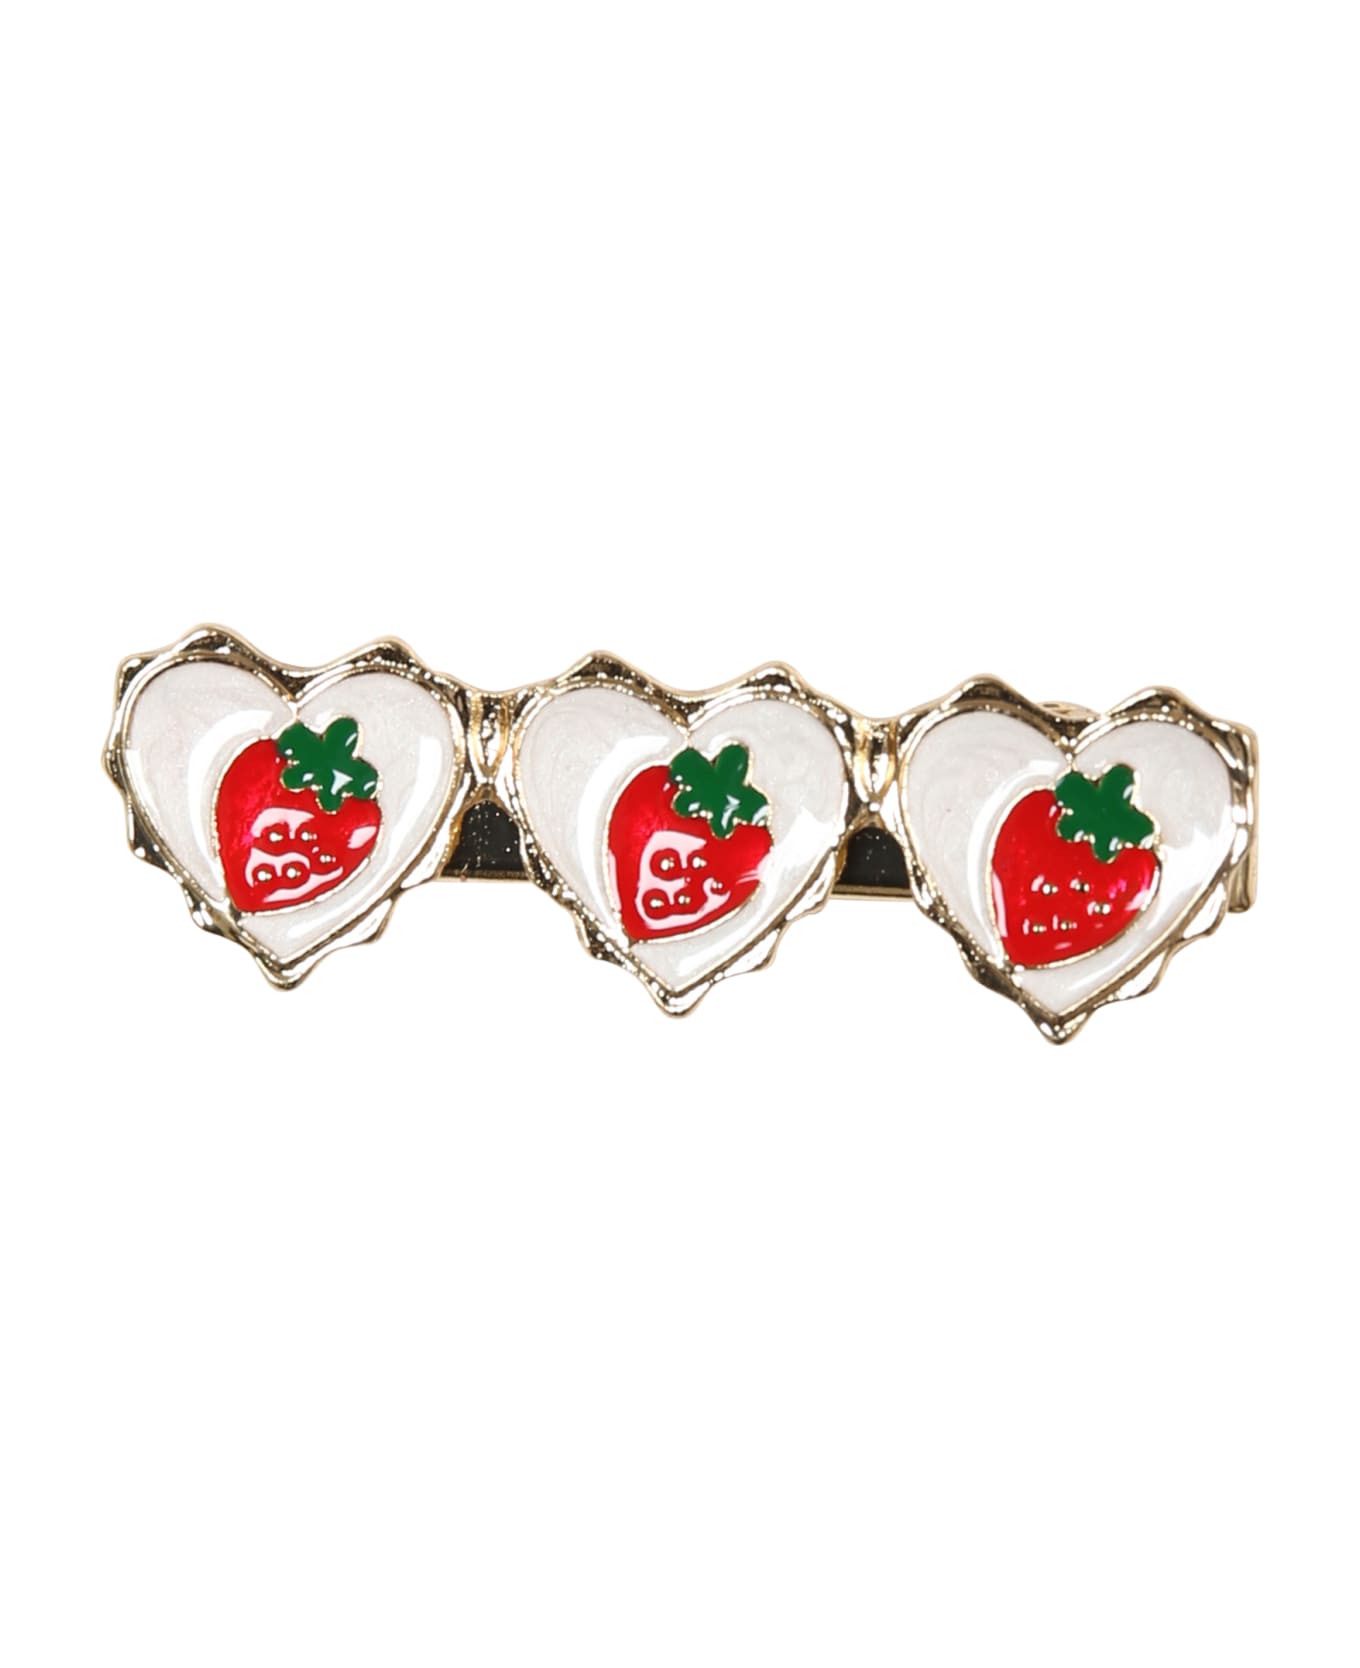 Monnalisa Set Of Hair Clips For Girl With Strawberries - Red